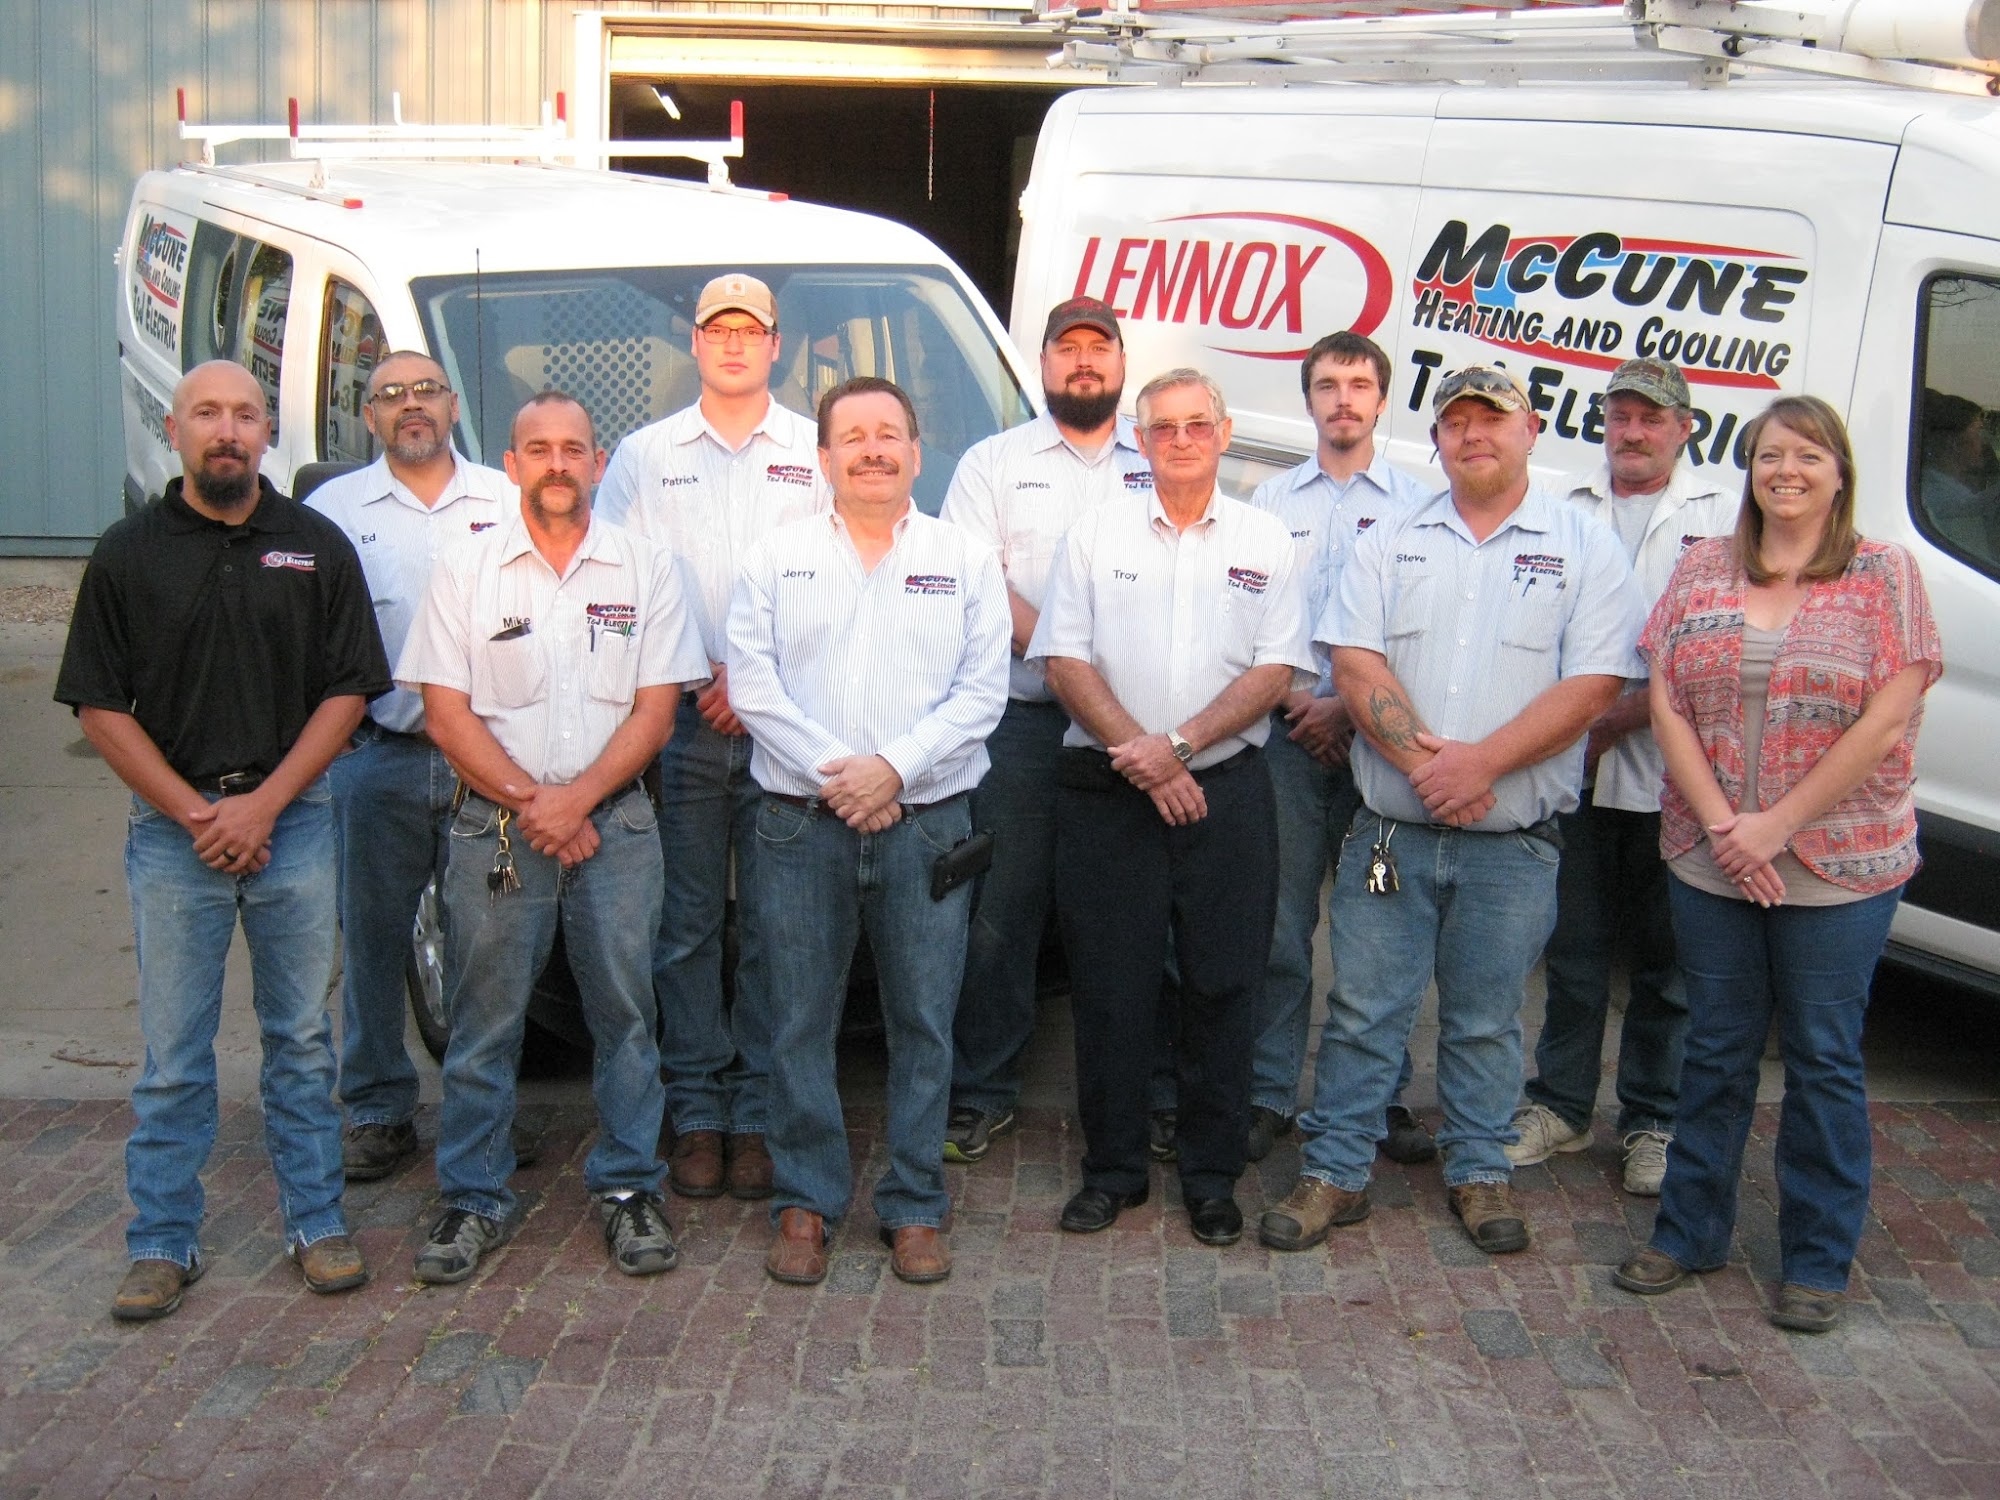 Mccune Heating & Cooling